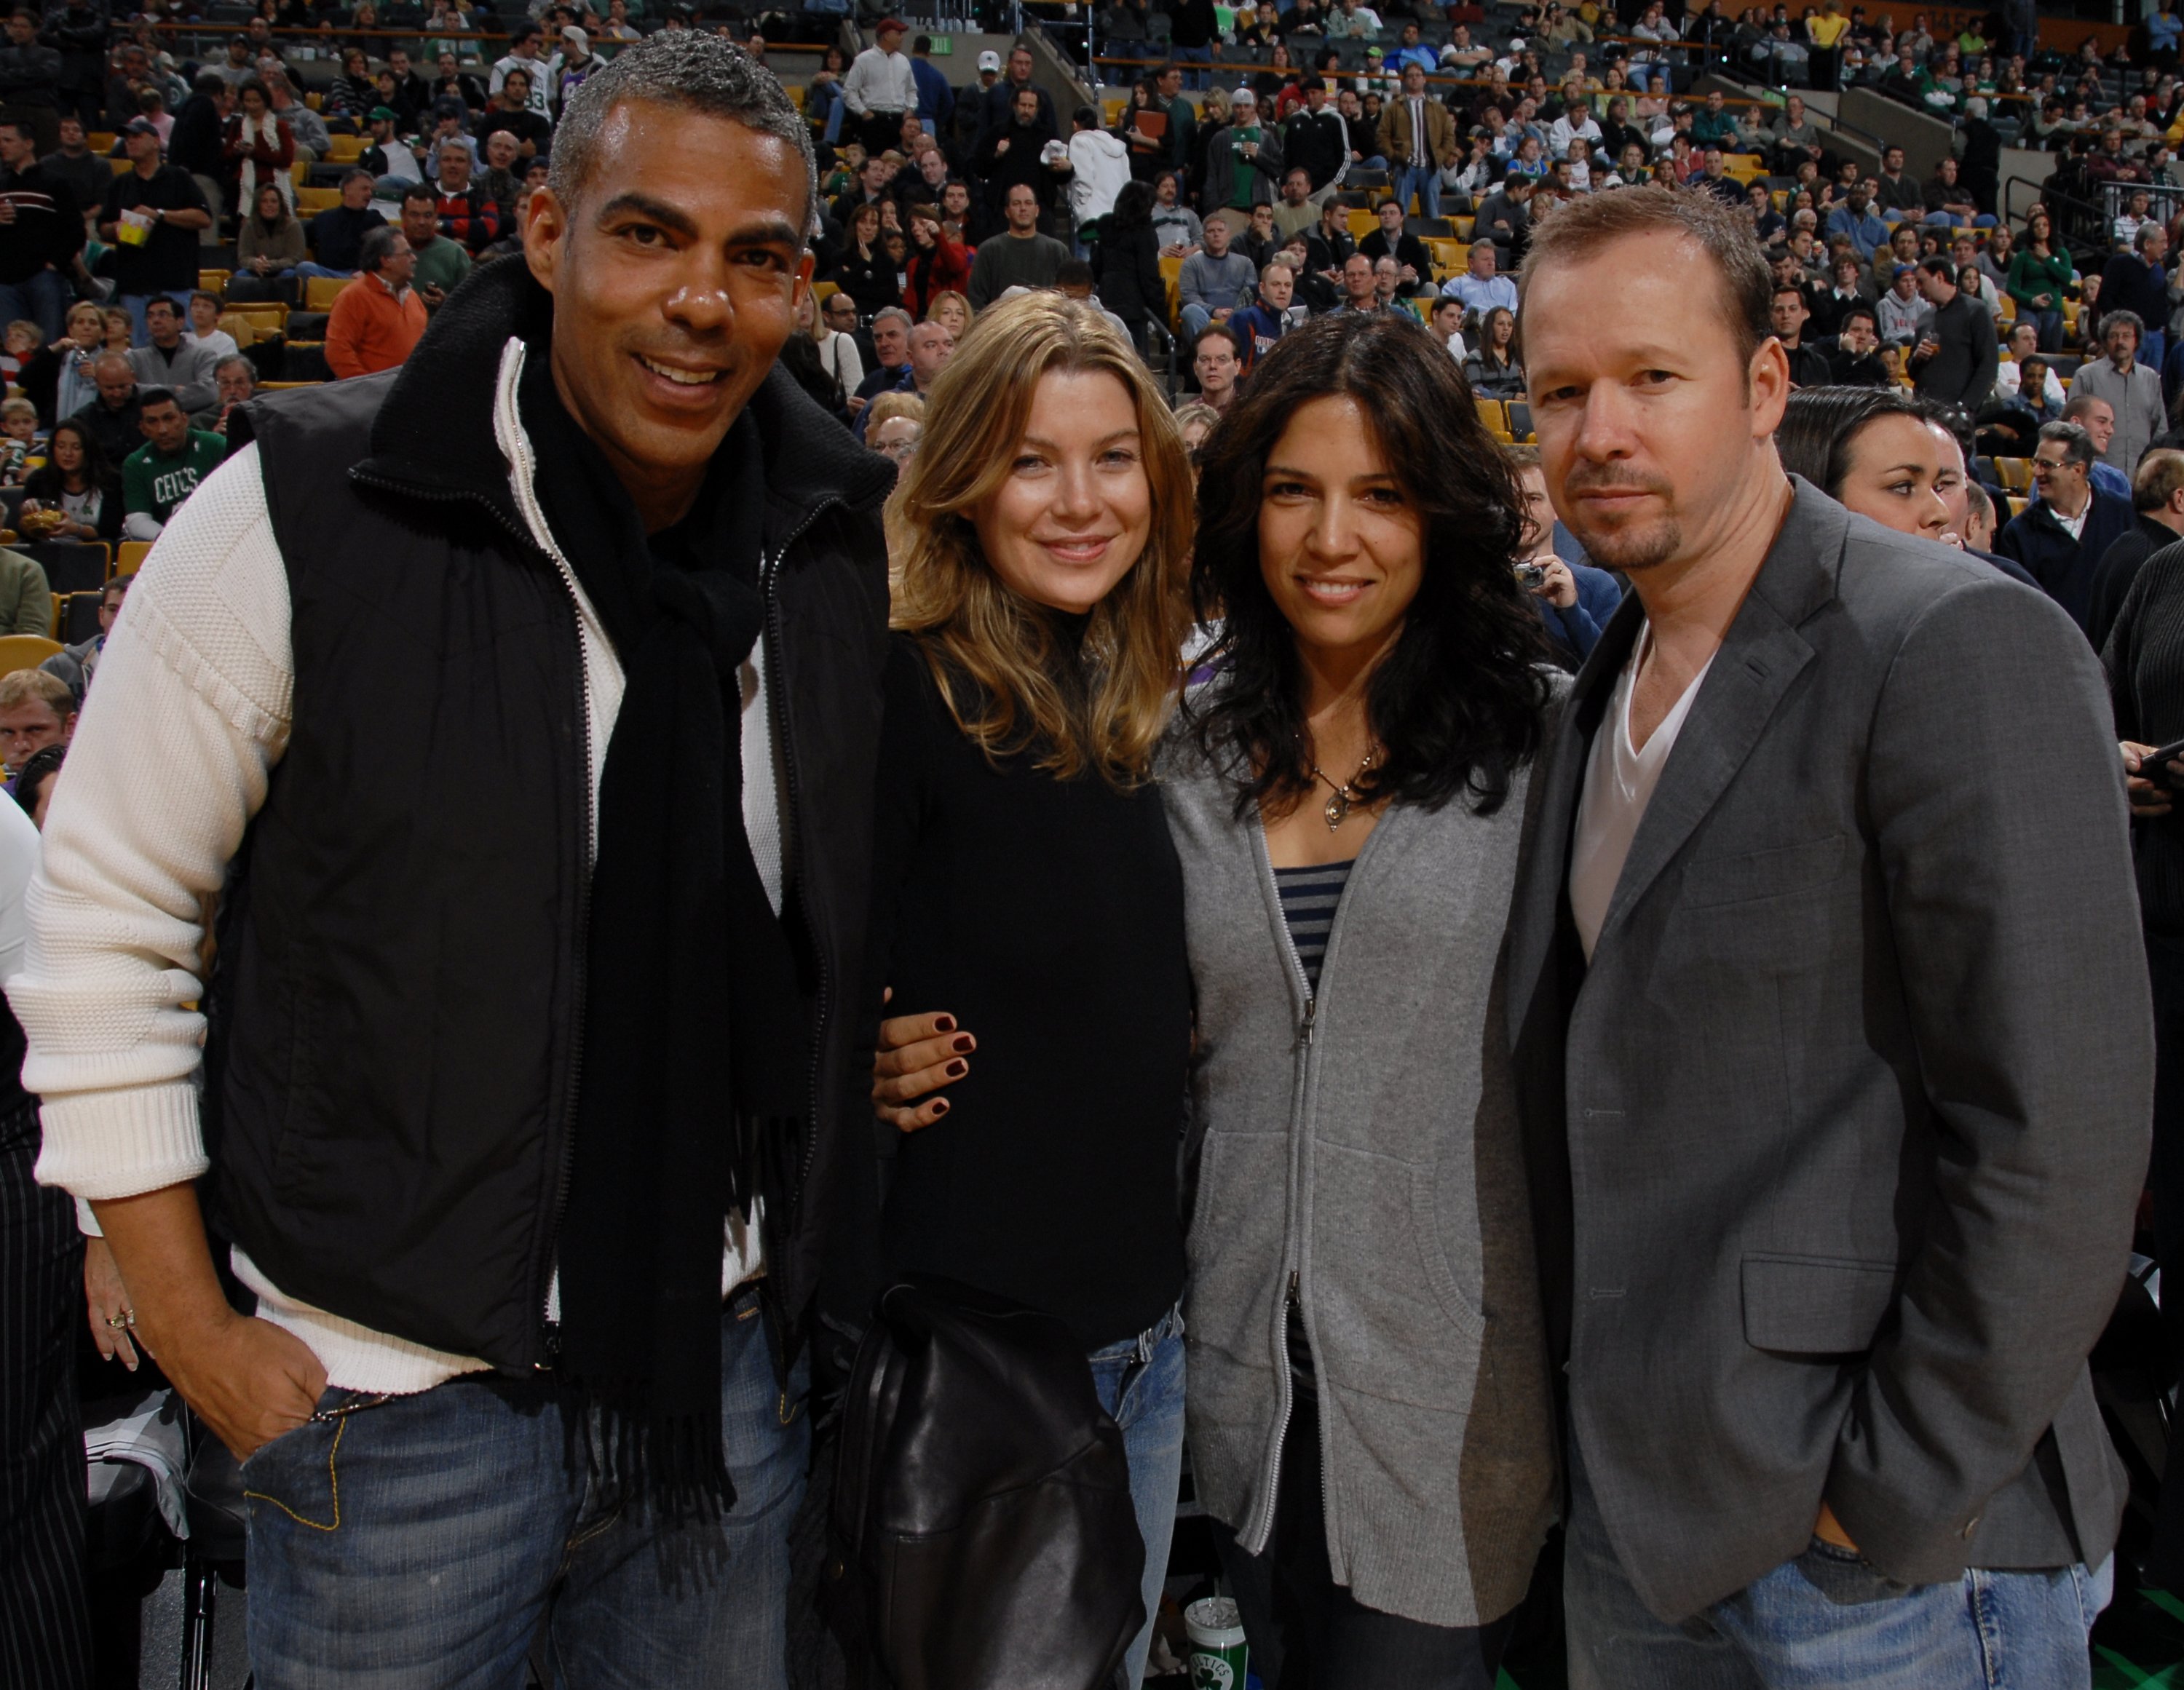 Chris Ivery, Ellen Pompeo, Kimberly Fey, and Donnie Wahlberg at the Boston Celtics game on November 23, 2007, in Boston | Source: Getty Images